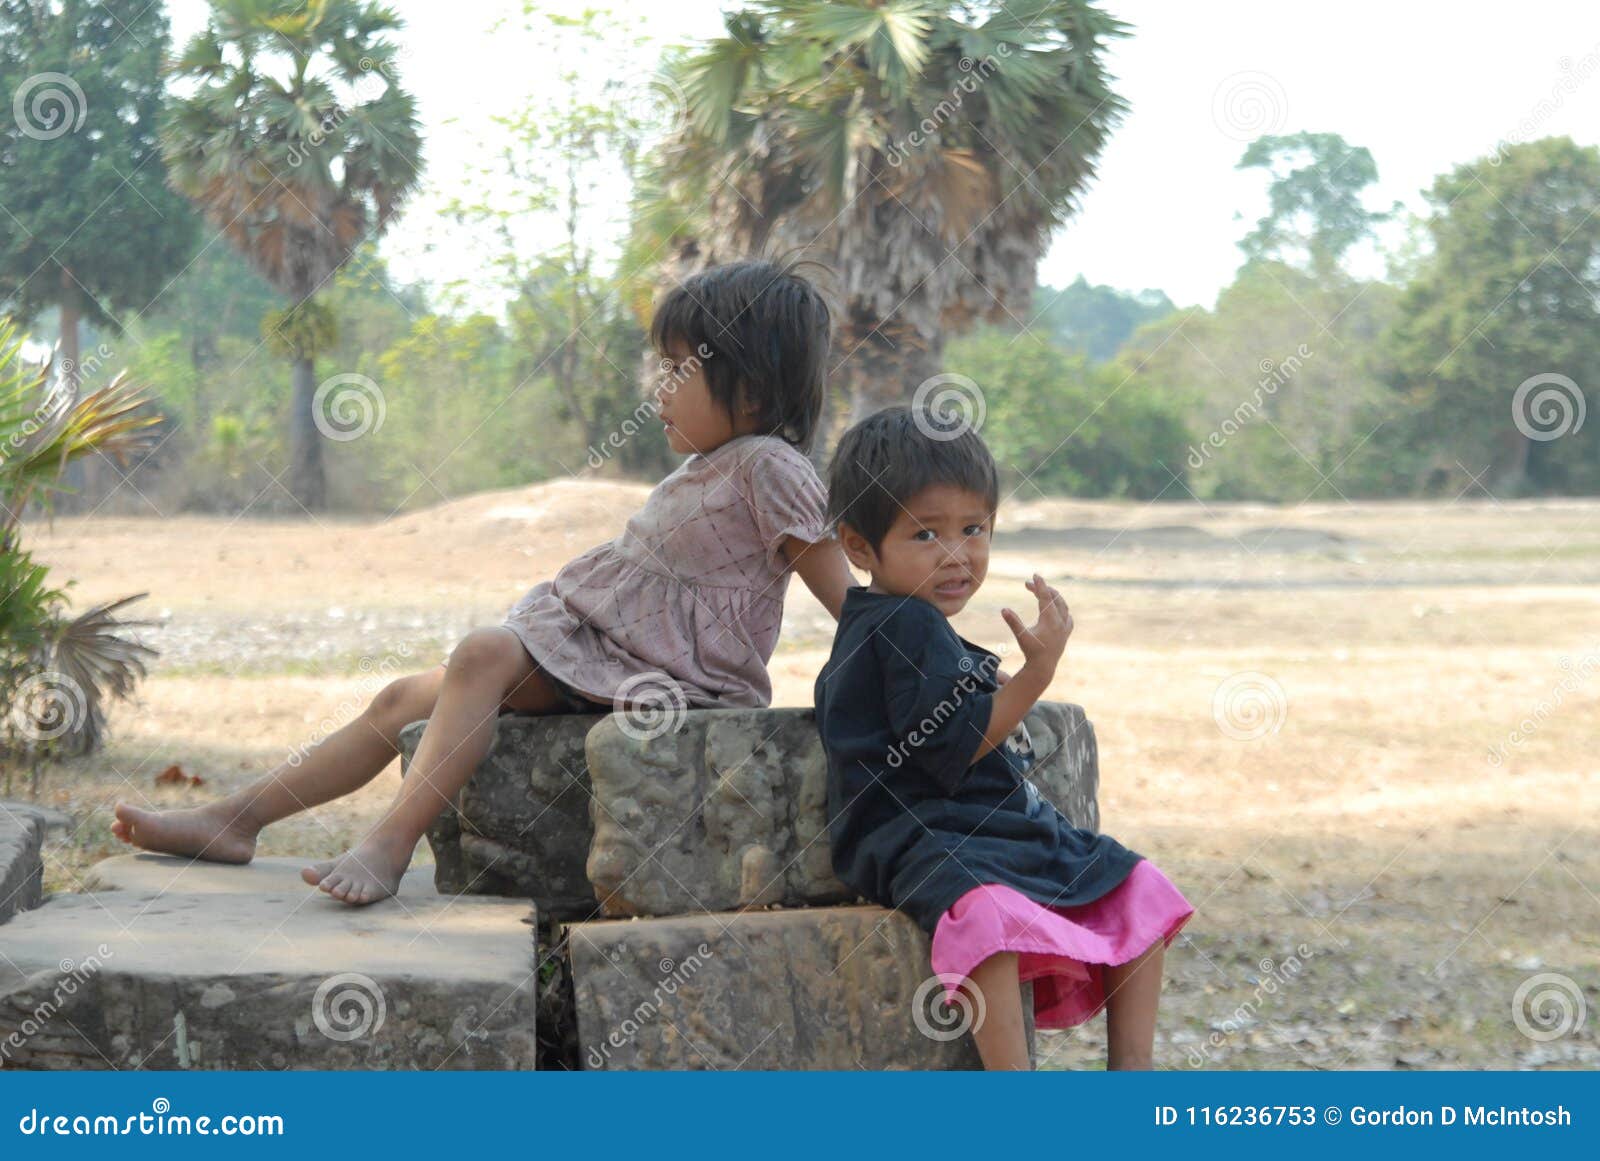 Two Small Children, Angkor Wat, Cambodia Editorial Stock Photo - Image ...